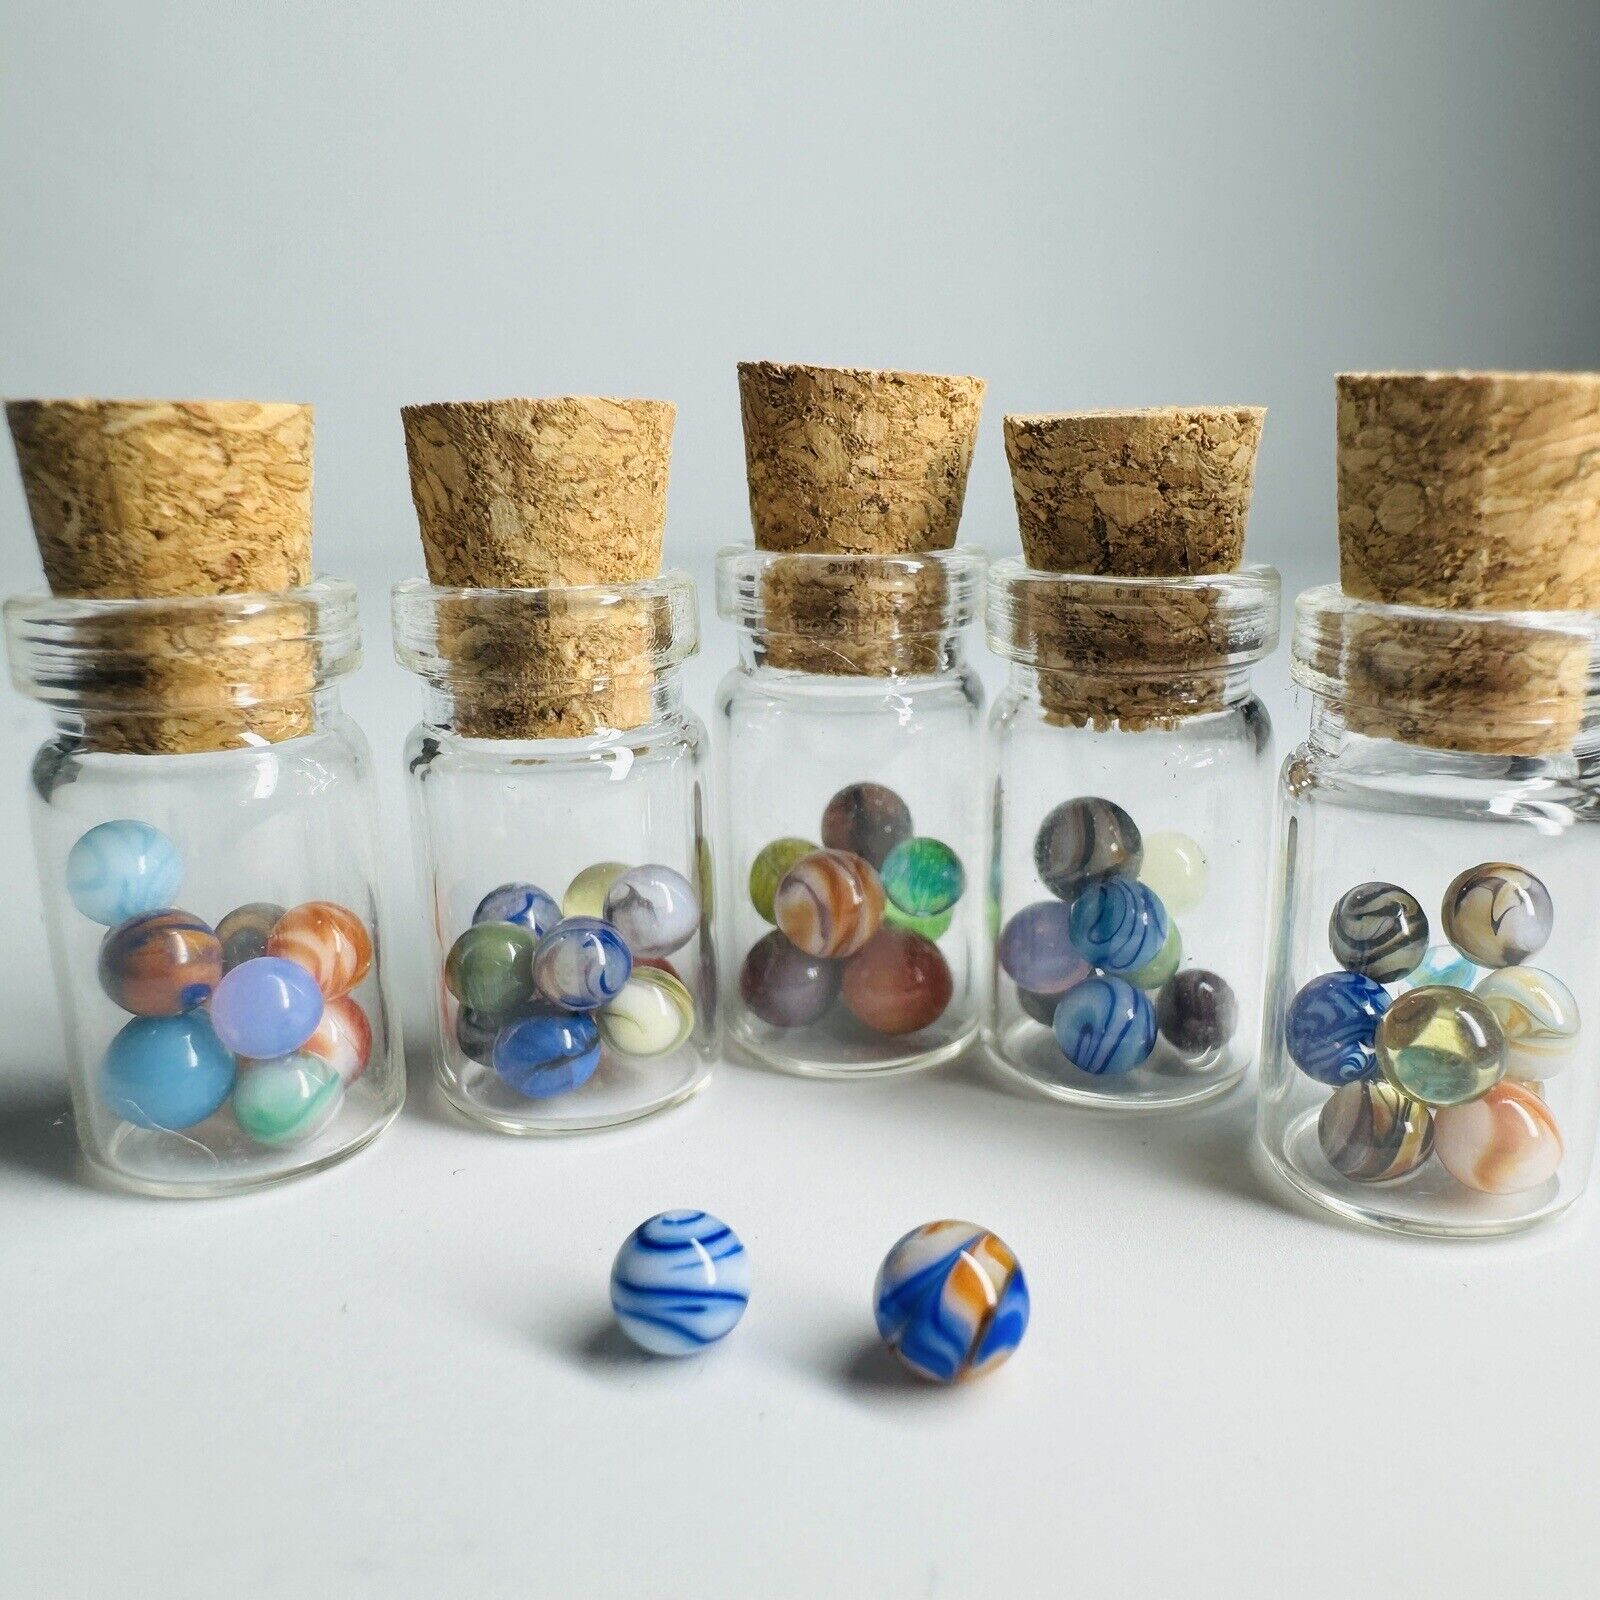 Lot of 10 in Jar JR Hooper Collection Miniature Glass Marbles Micro Peewee 1:12